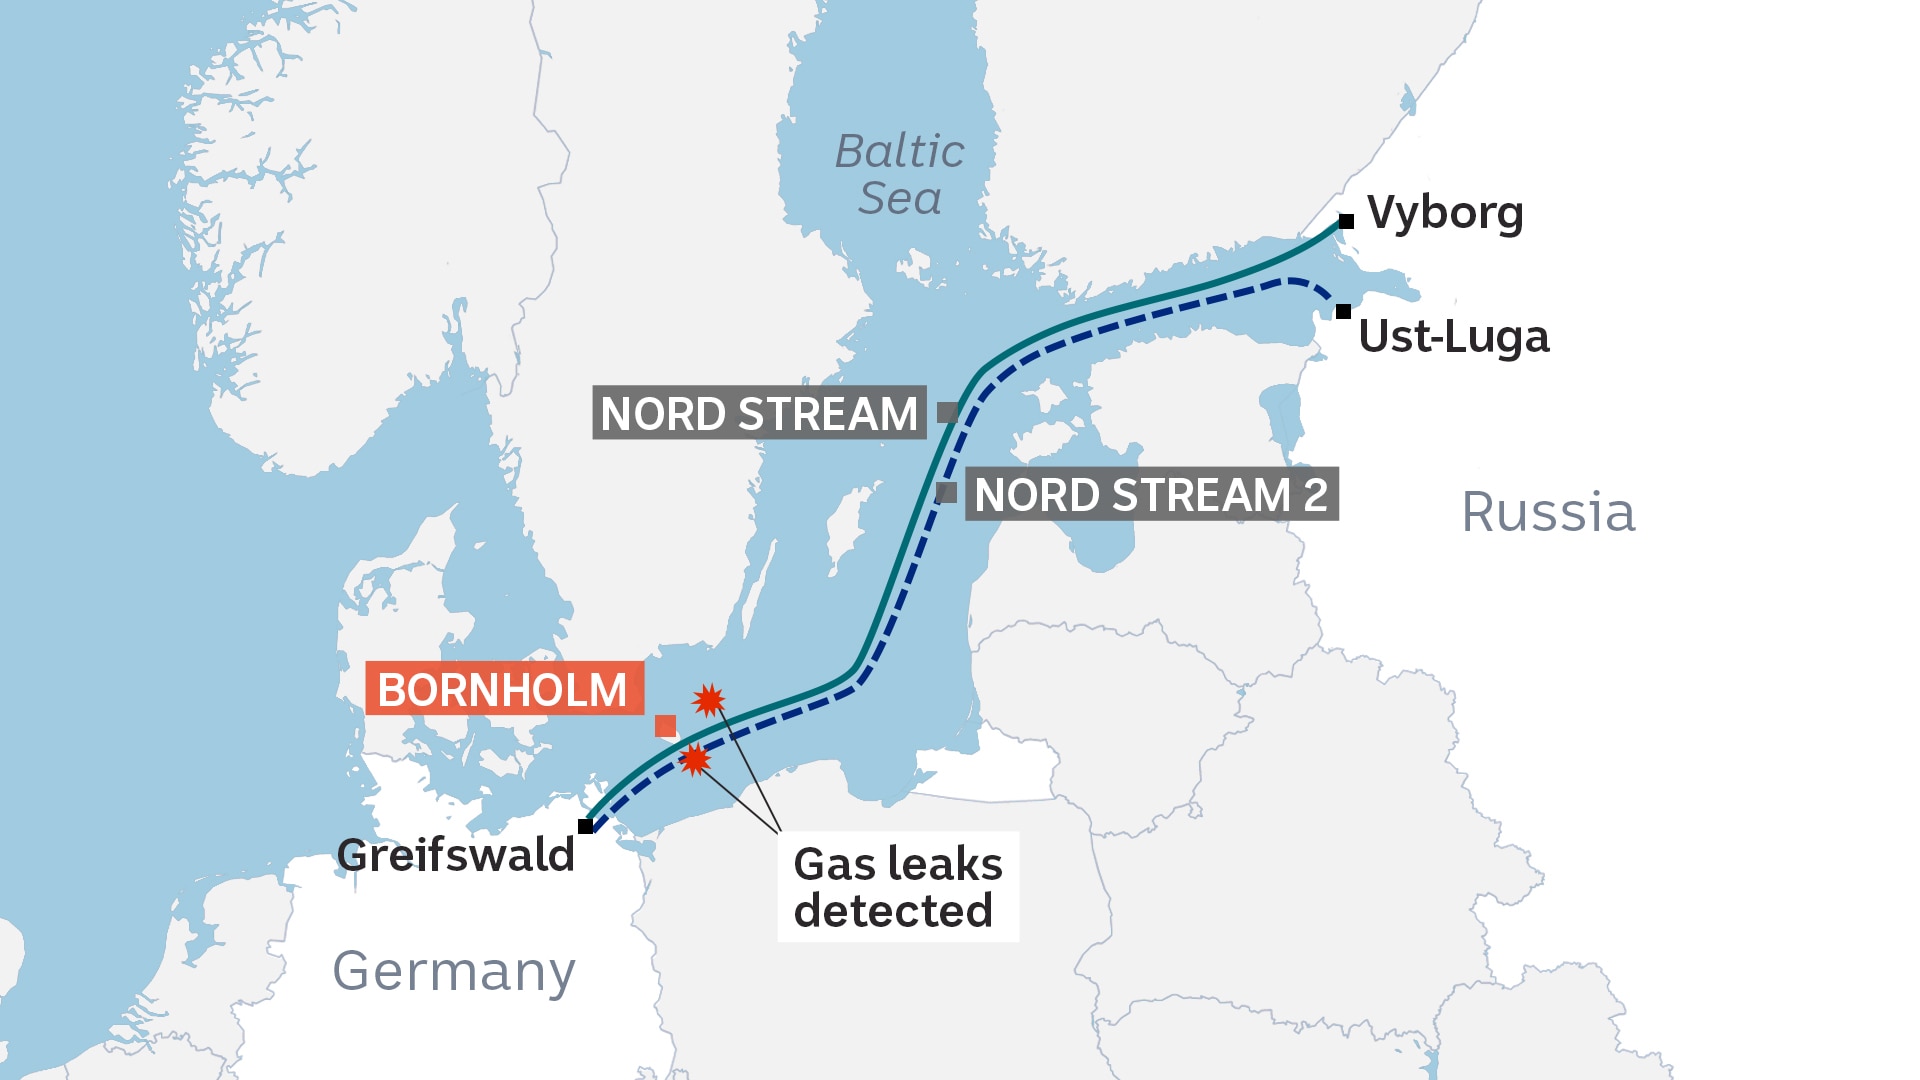 A map showing the Nord Stream pipelines and where they were sabotaged.